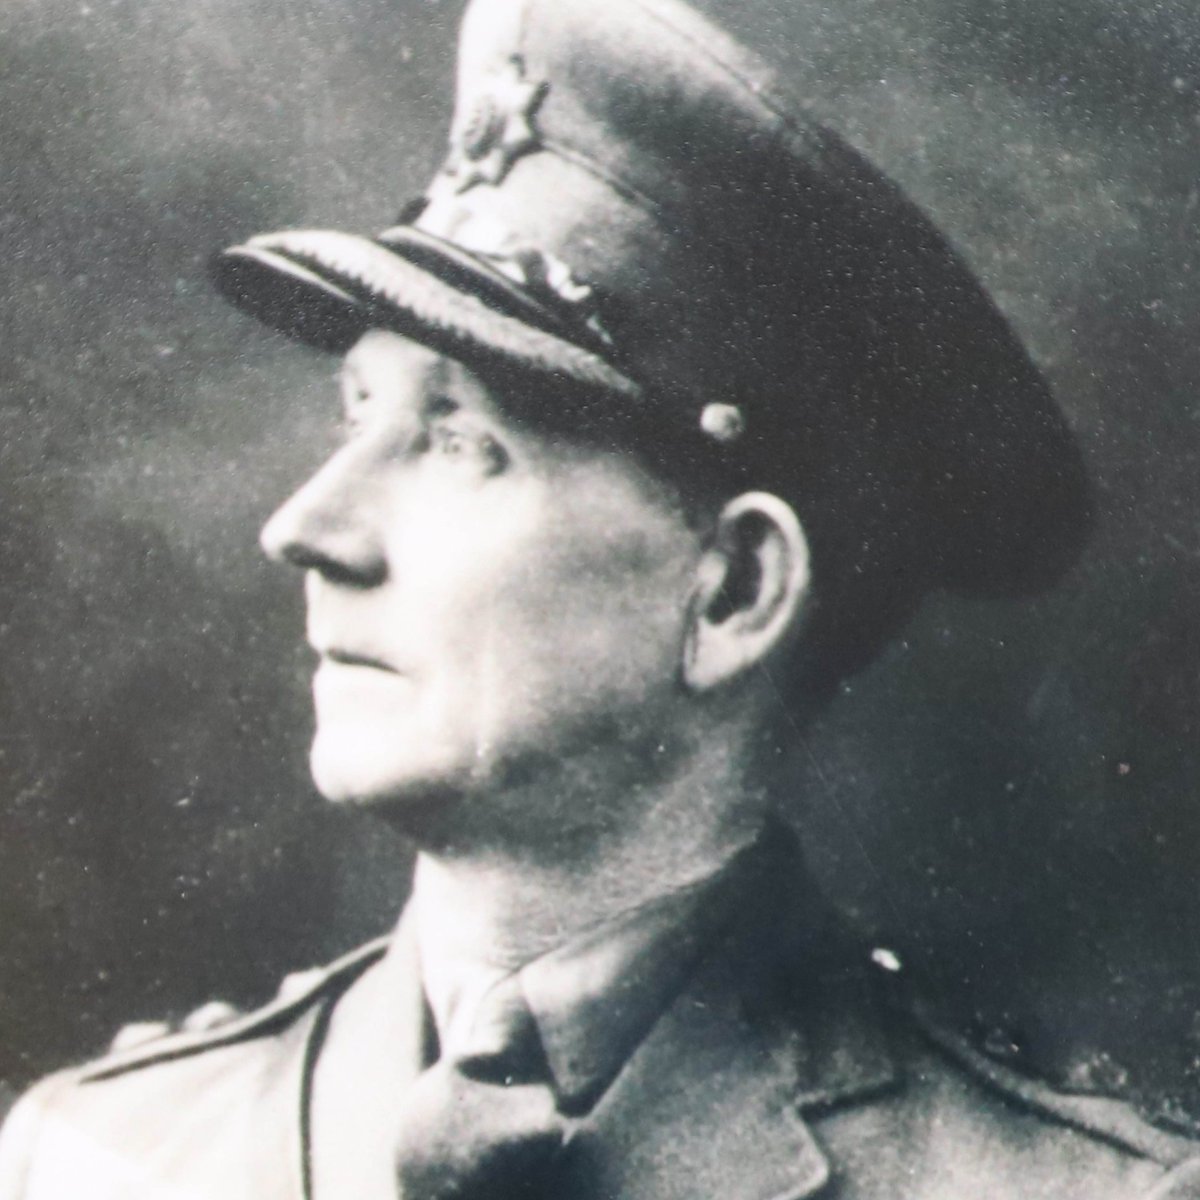 The Winter Lecture Series continues at @ClareMuseumIE on Wednesday, 17th April, at 7:30pm, with a talk by Geraldine Burke entitled ‘County Clare Connections in the Army Athletic Association in the 1920s and 1930s’. Read more at: clarecoco.ie/your-council/[…